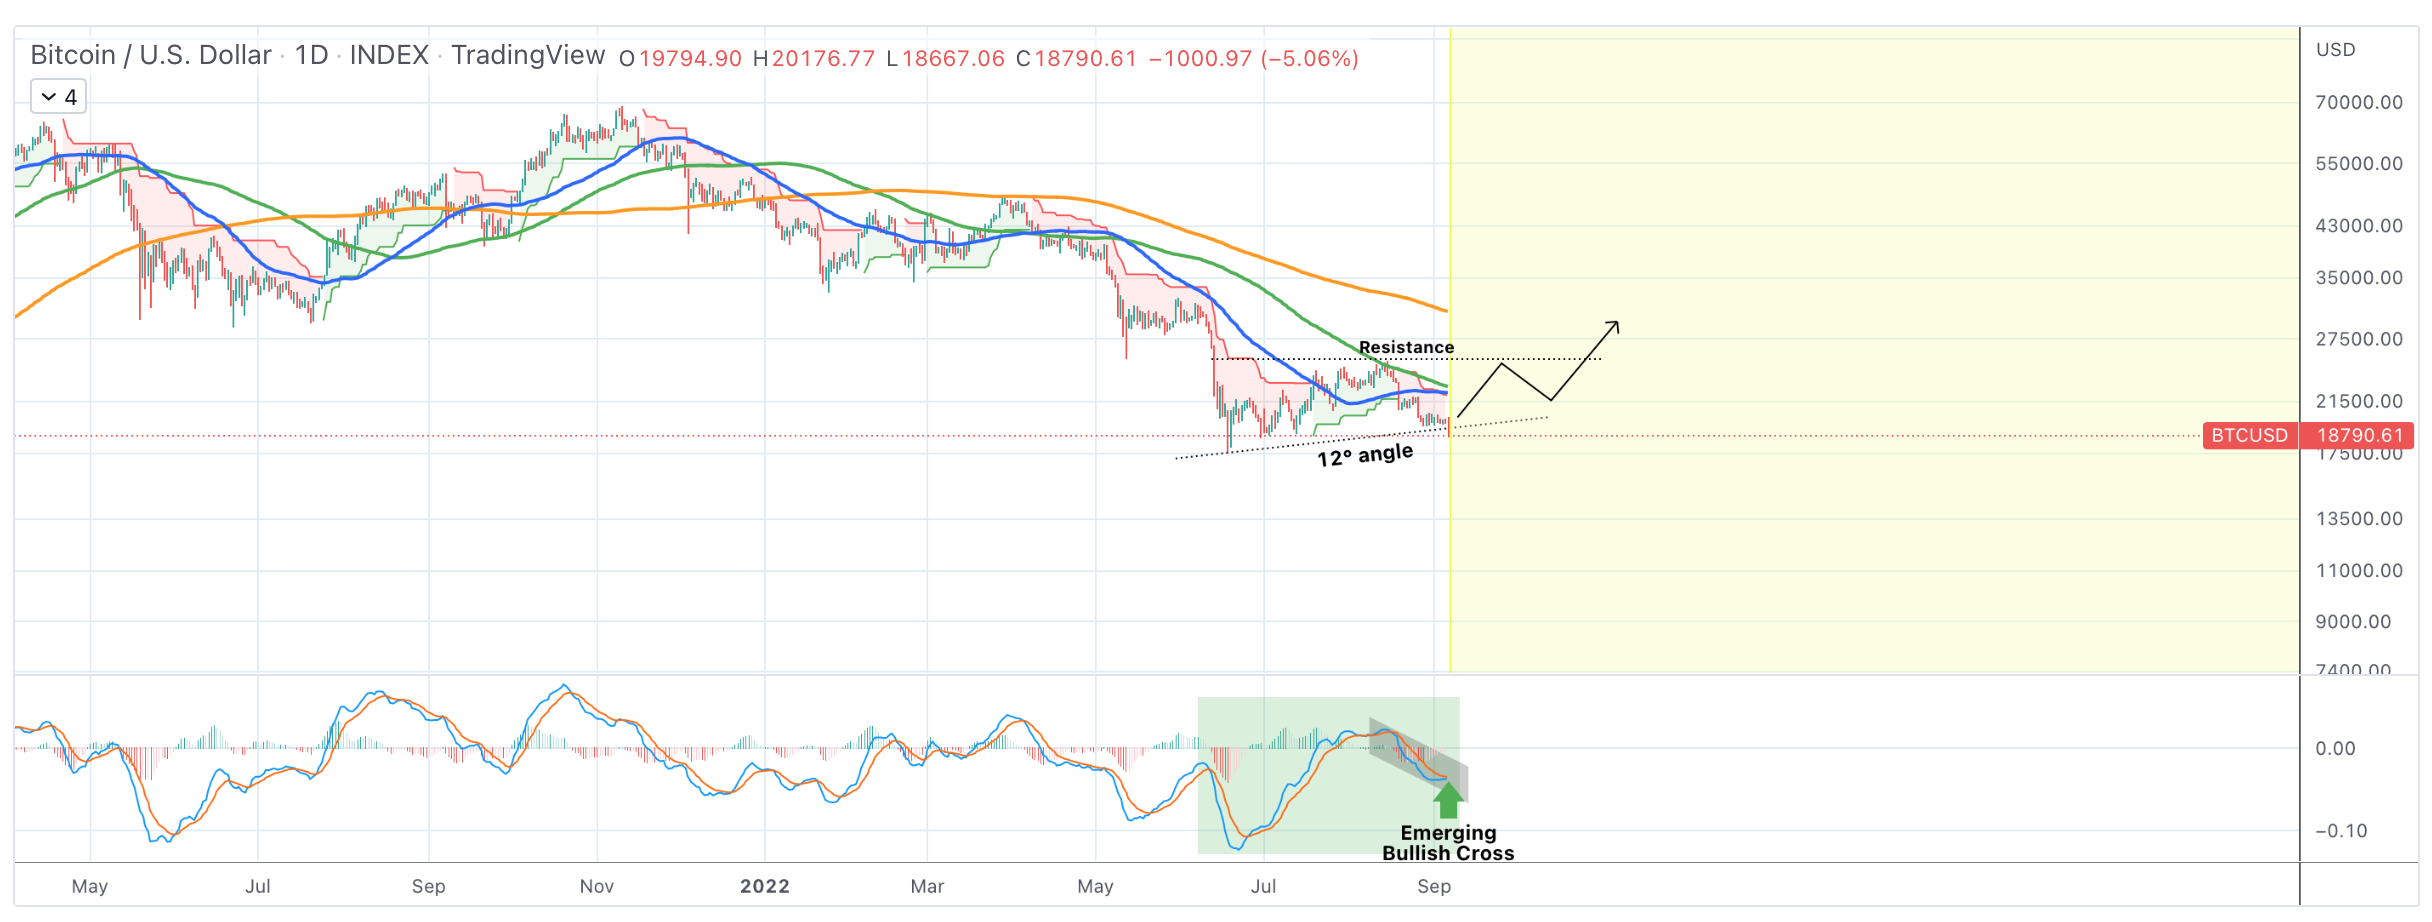 Bitcoin price analysis - BTC stabilizing after fear fall